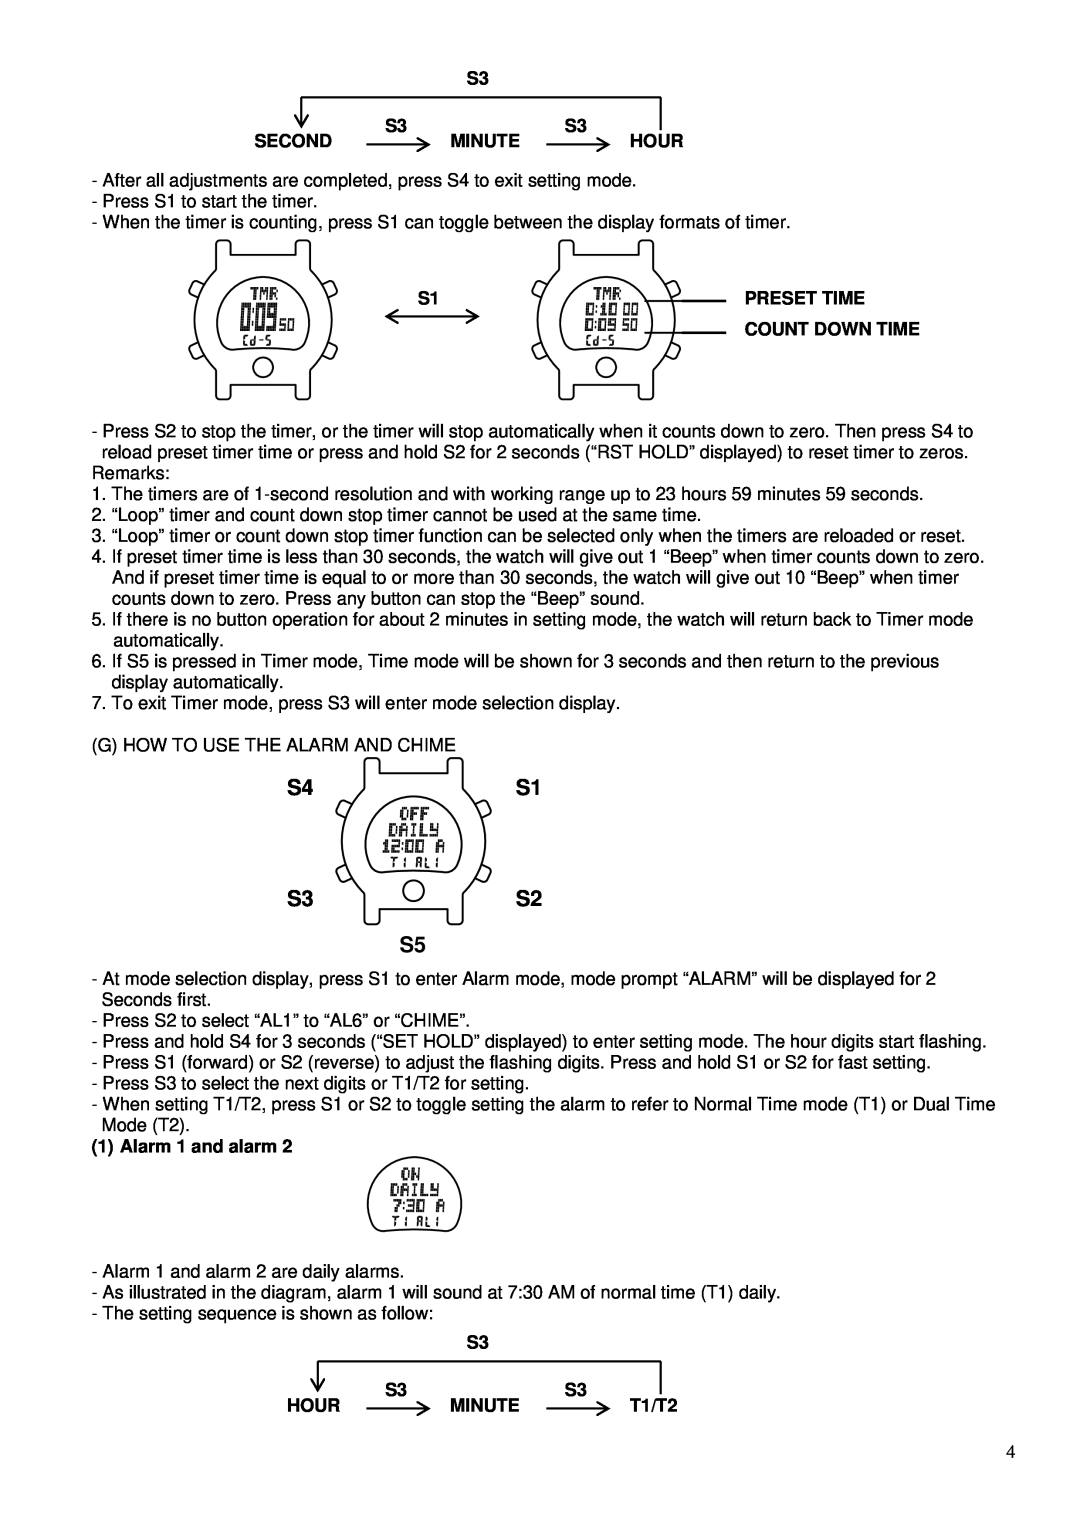 Robic SC-577 operating instructions S4S1 S3S2 S5, Minute 